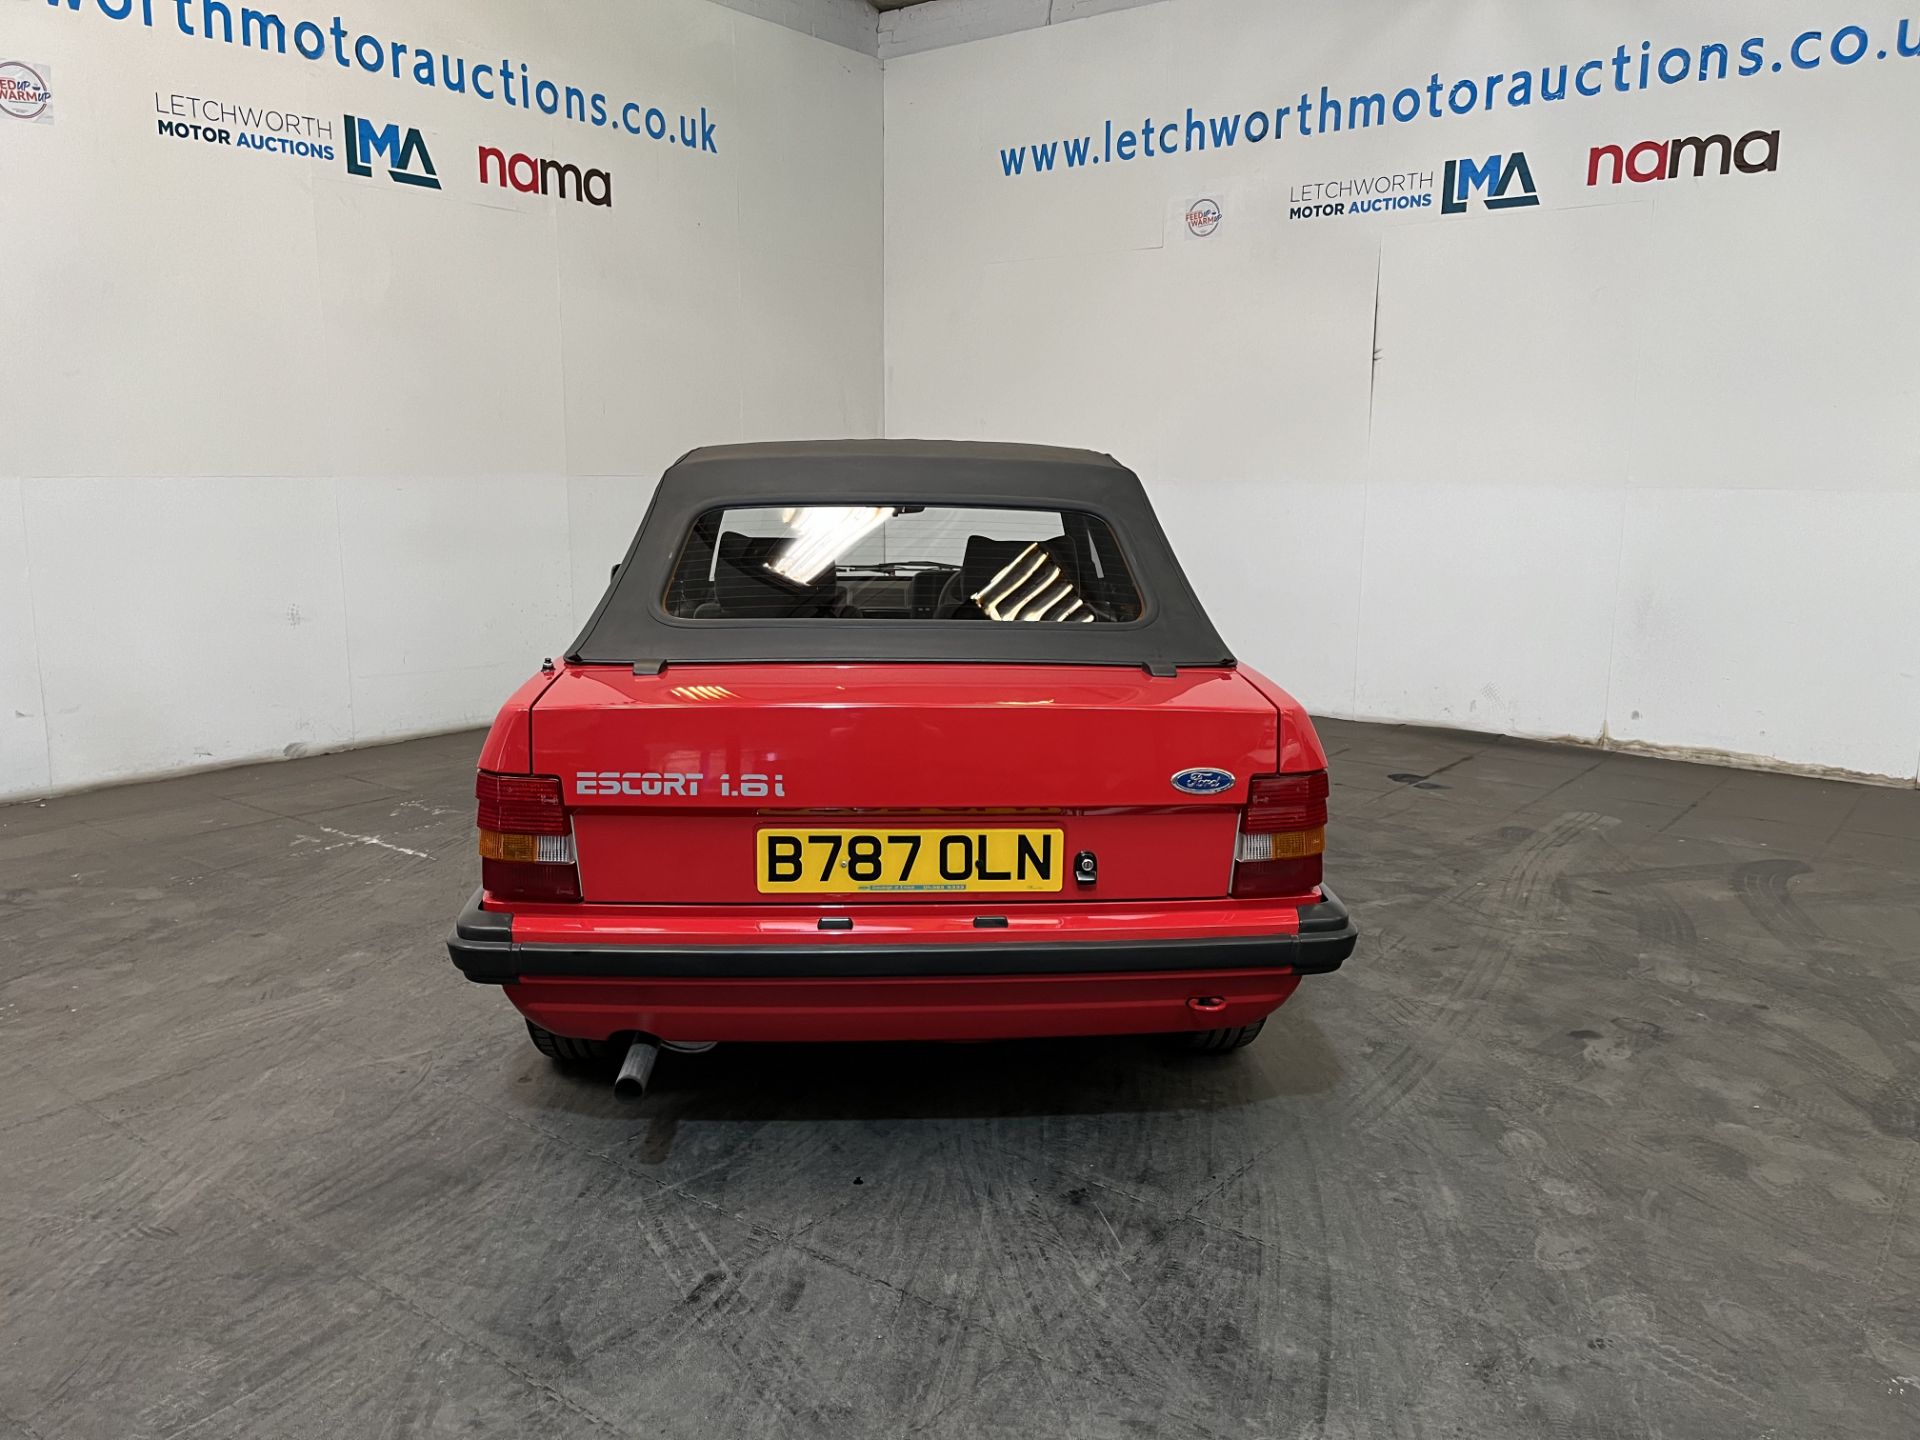 1985 Ford Escort 1.6i Cabriolet - 1597cc *ONE OWNER FROM NEW* - Image 9 of 24